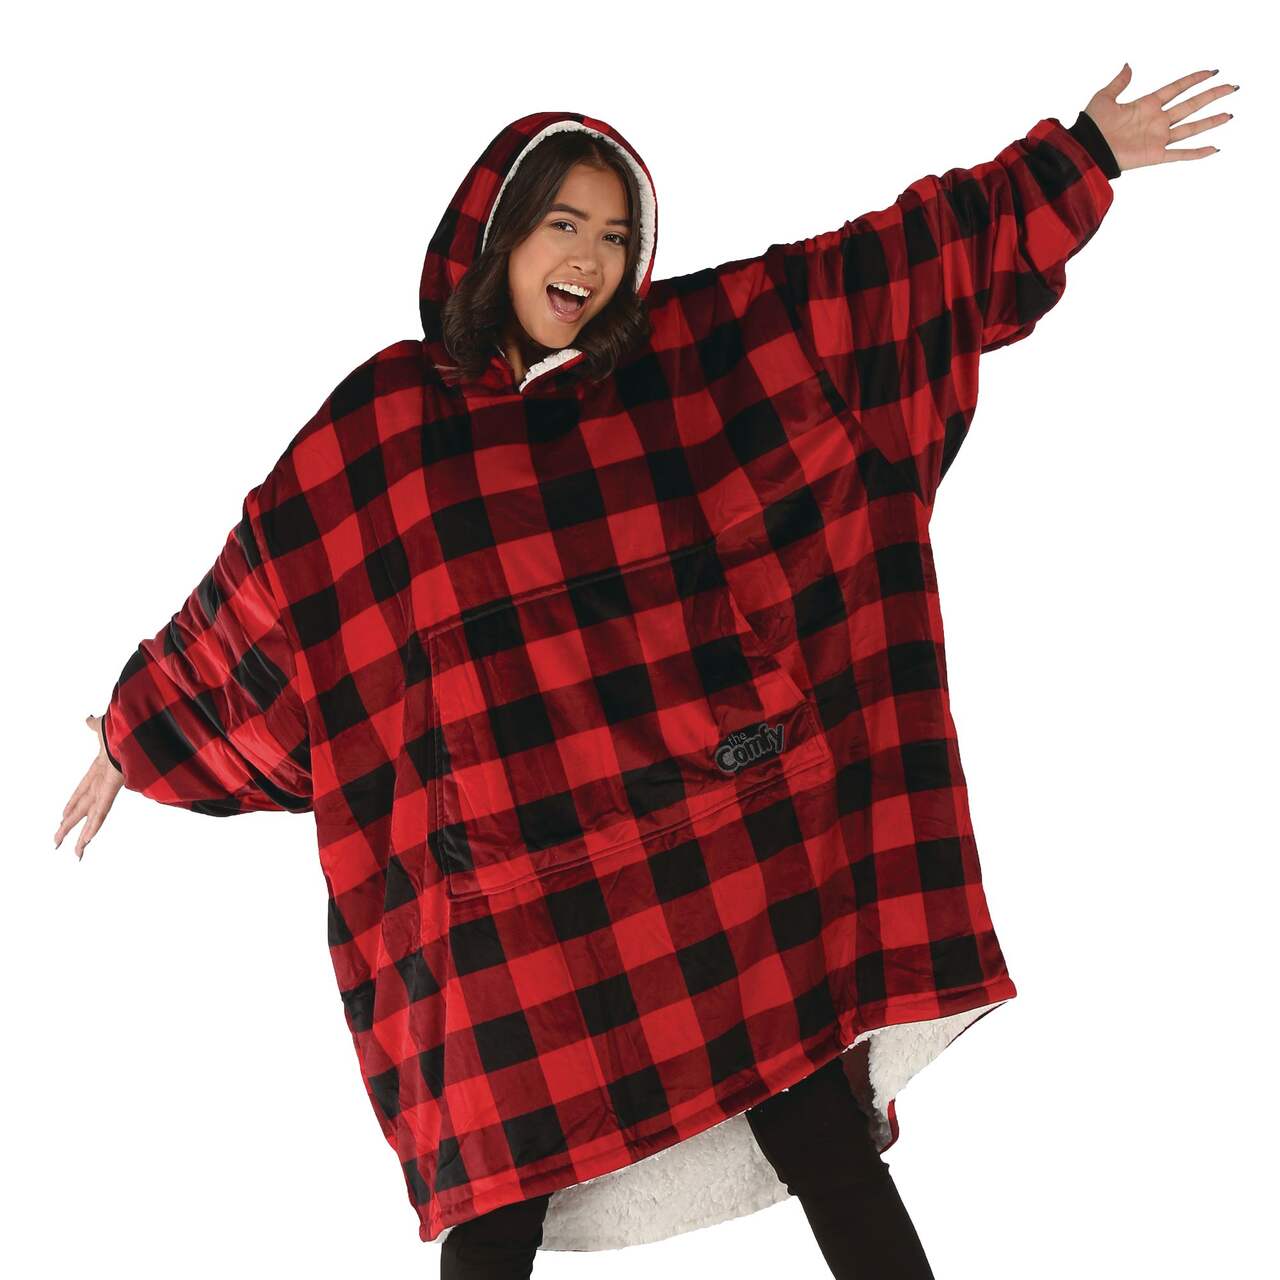 https://media-www.canadiantire.ca/product/living/as-seen-on-tv/asotv/4991414/comfy-original-red-plaid-a9302b81-7a65-4a82-ae78-acf229194a97-jpgrendition.jpg?imdensity=1&imwidth=640&impolicy=mZoom